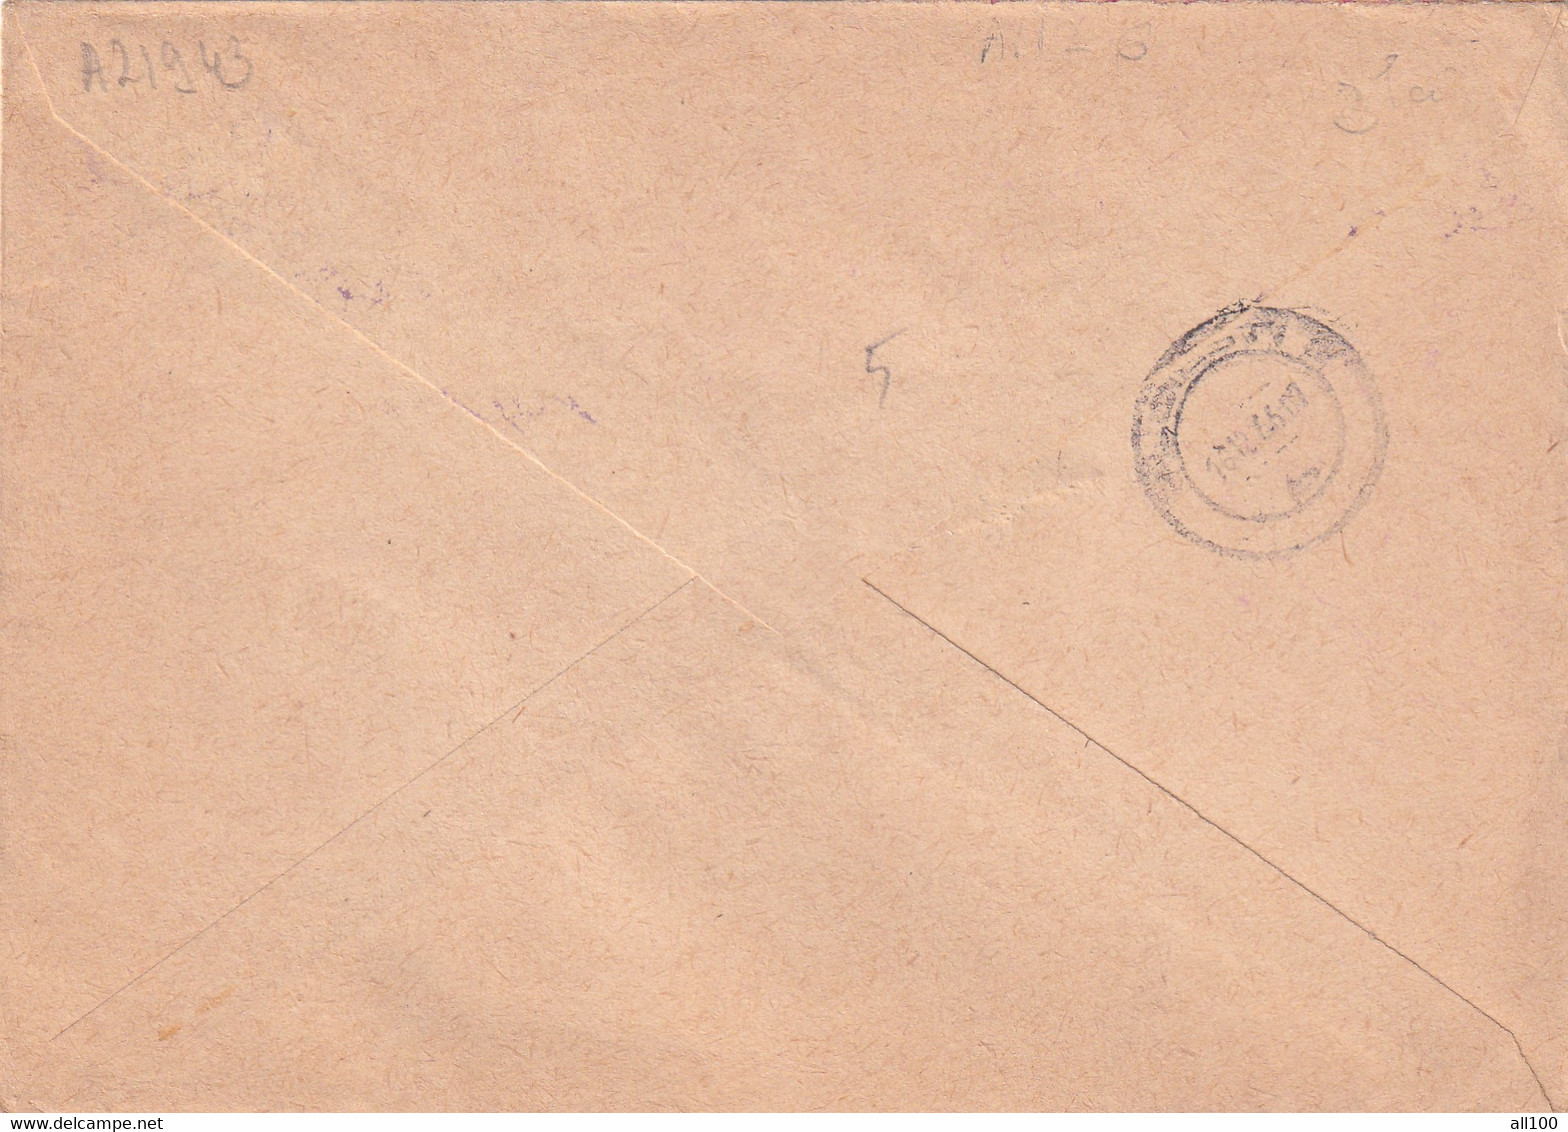 A21943 - Stamp Eduard Vilde Estonian Writer 1965 USSR Mail Soviet Union Cover Envelope Used 1966 Sent To Romania - Covers & Documents